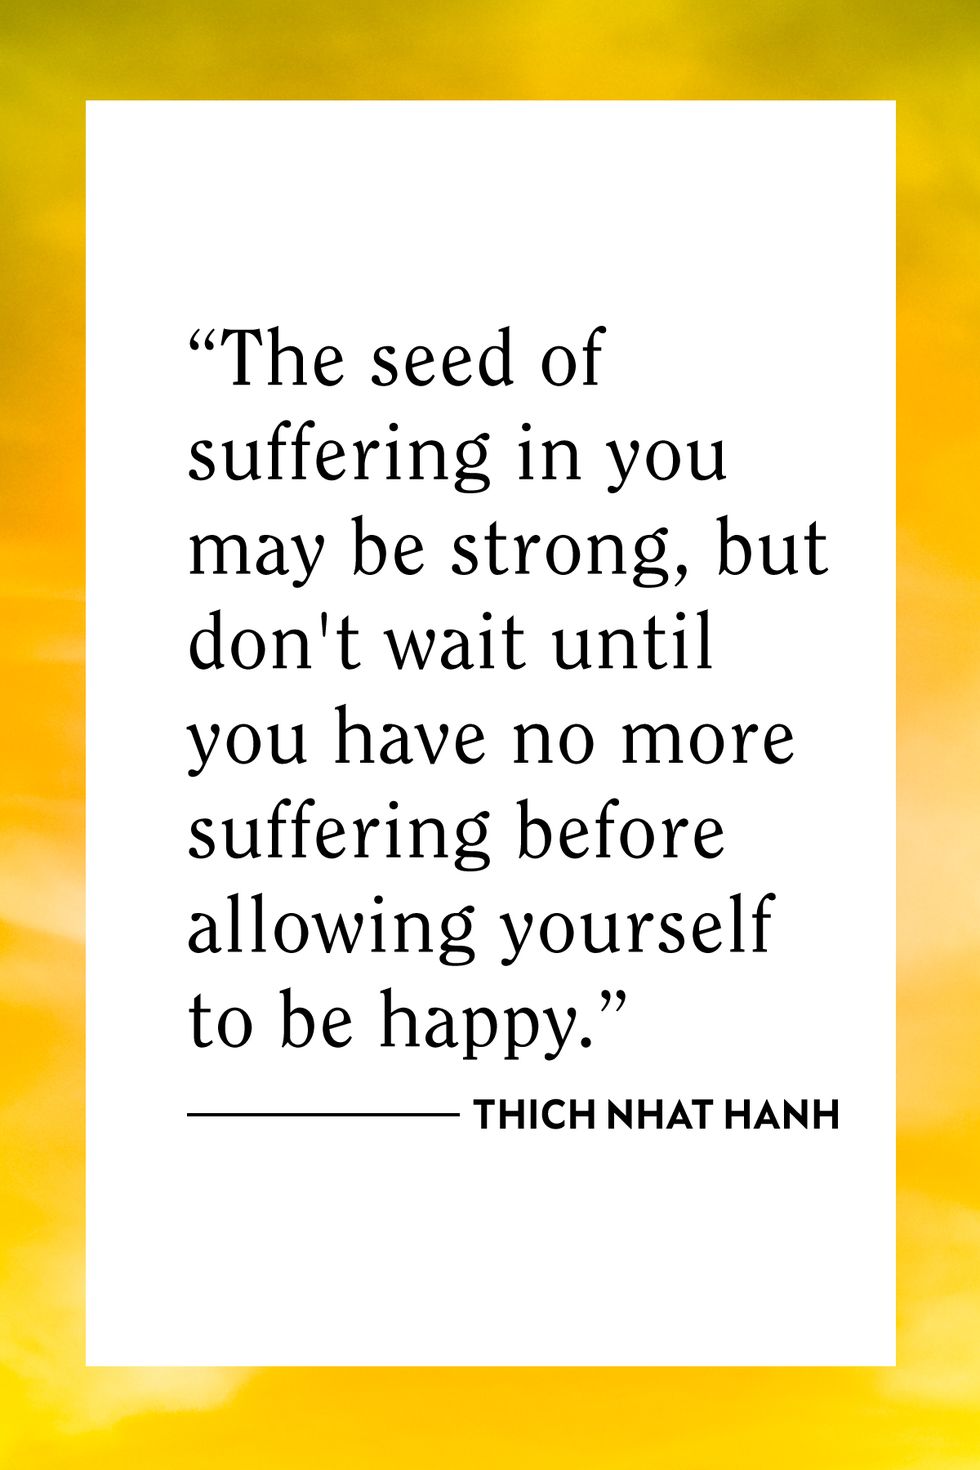 50 Inspiring Thich Nhat Hanh Quotes On Love, Mindfulness, And Peace